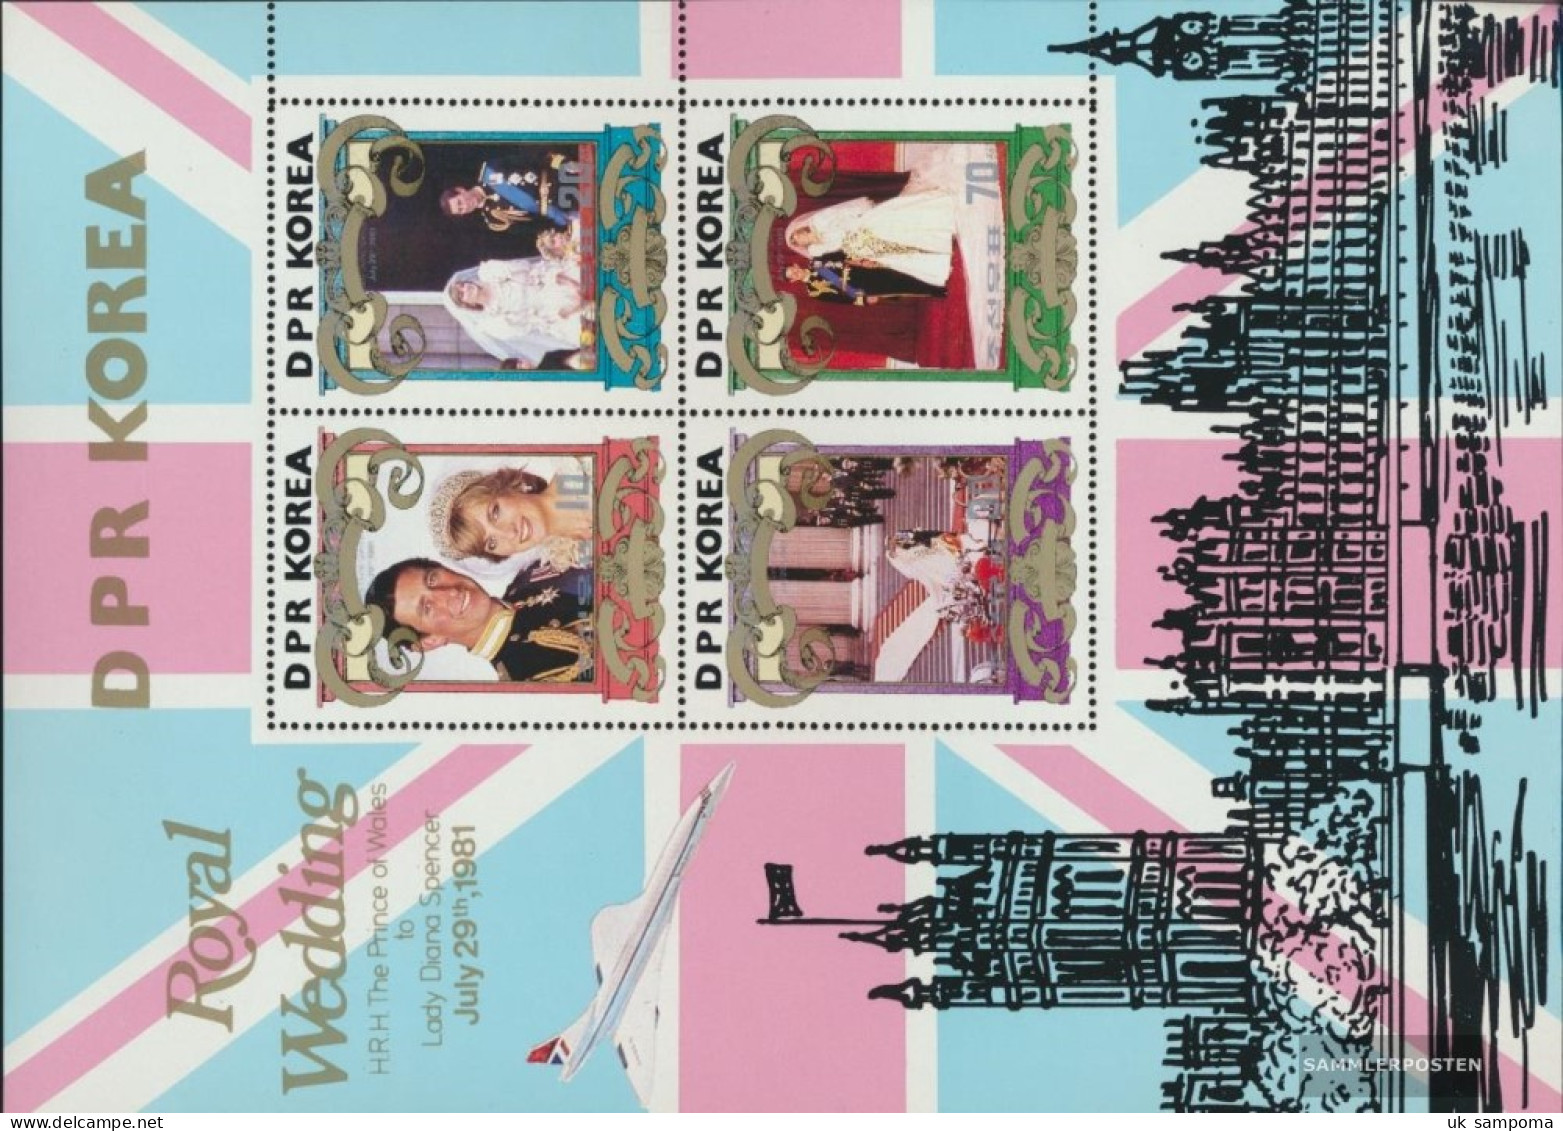 North-Korea 2173-2176A Sheetlet (complete Issue) Unmounted Mint / Never Hinged 1981 Wedding Prince Charles + Lady Di - Corea Del Norte